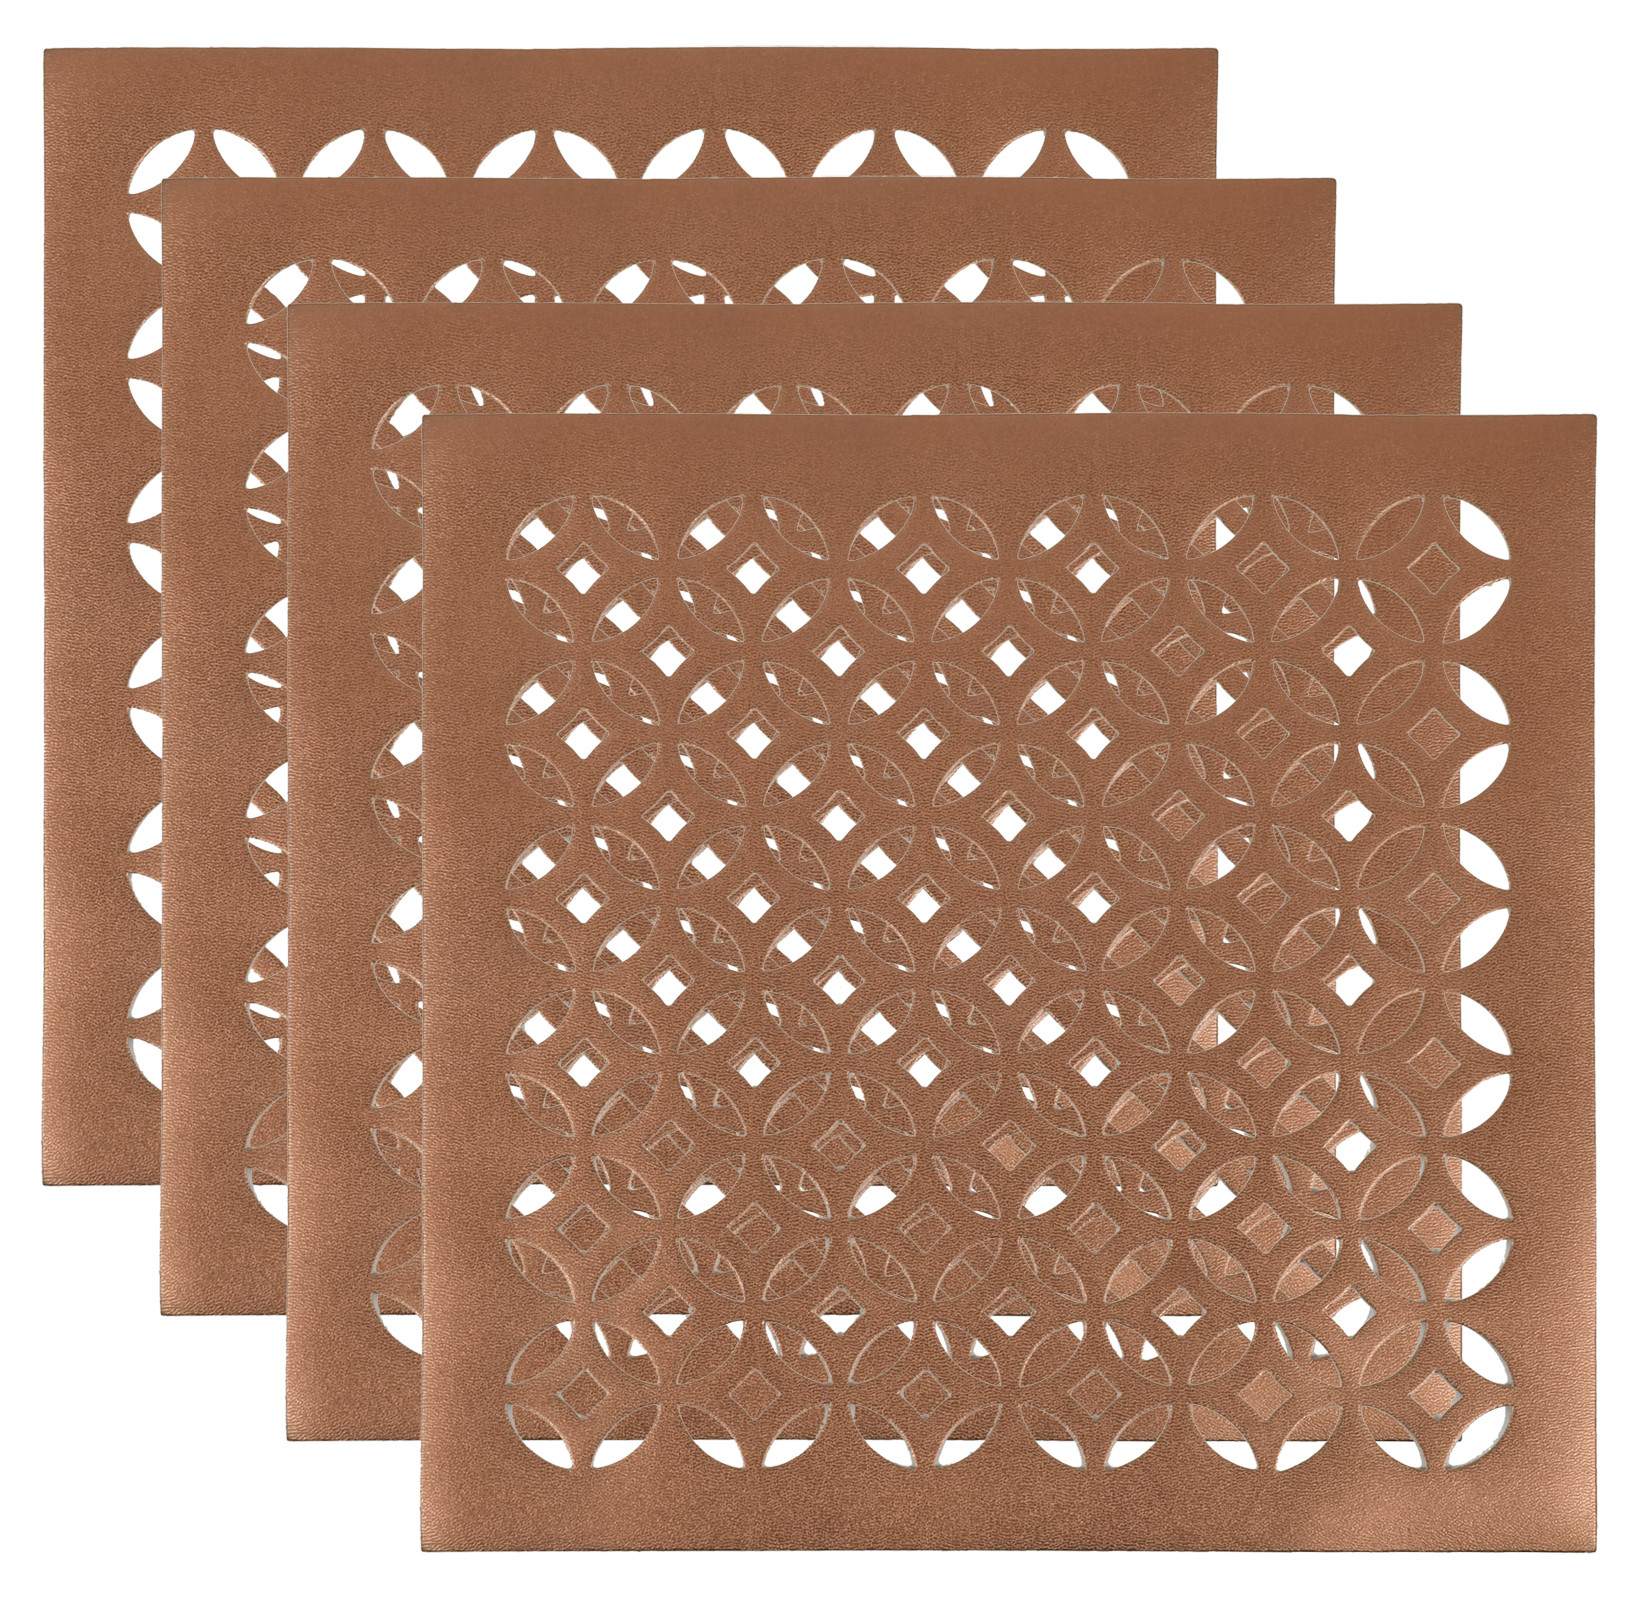 Kuber Industries Square Soft Leather Table Placemats, Set of 4 (Copper)